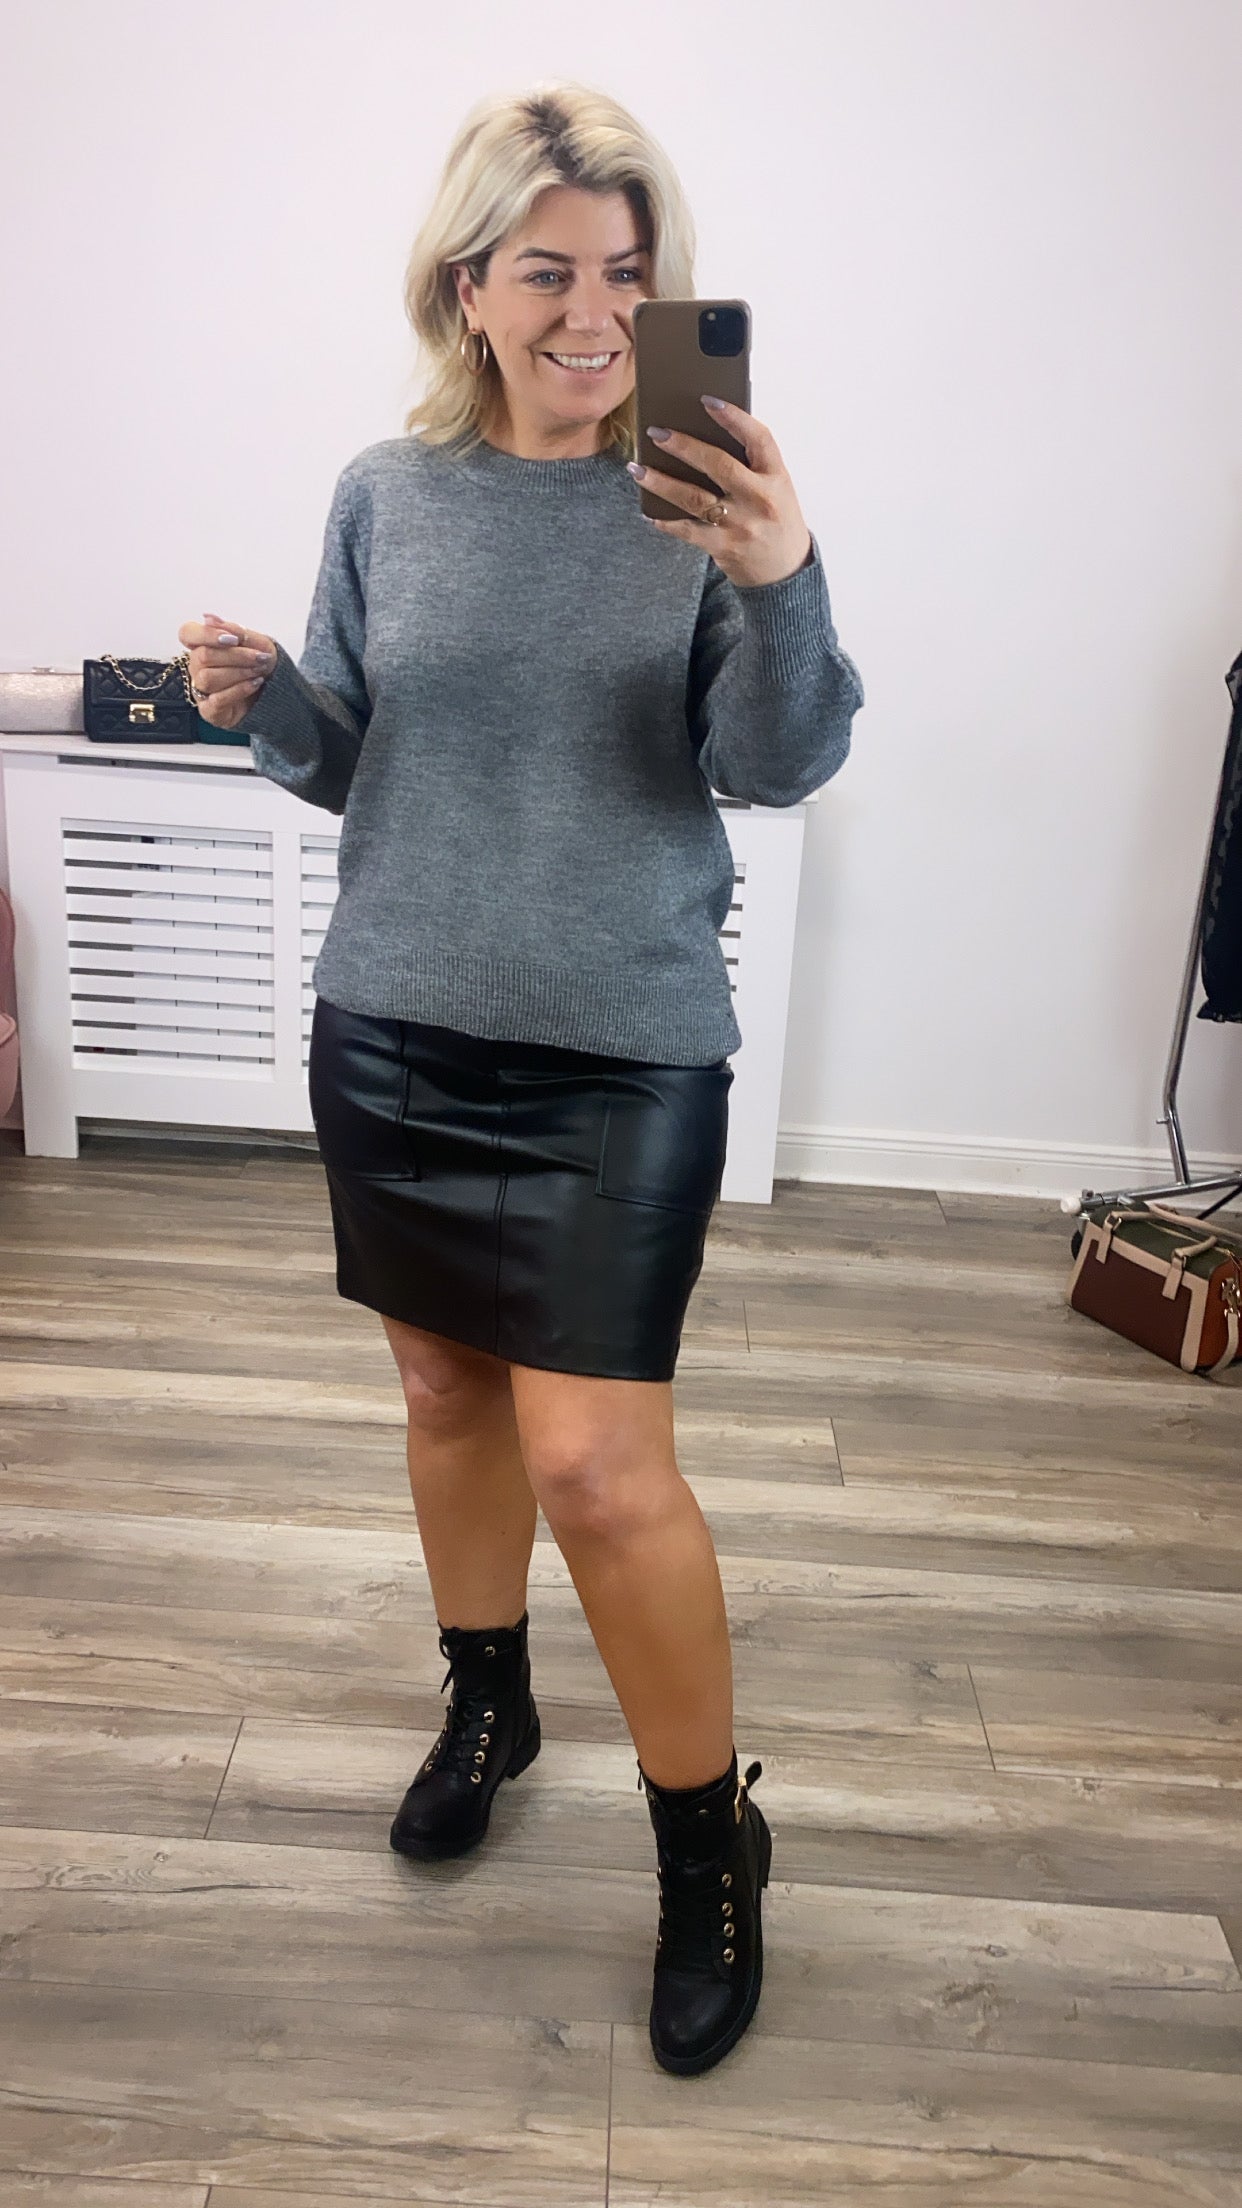 Nelly Faux Leather Mini Skirt (Black)